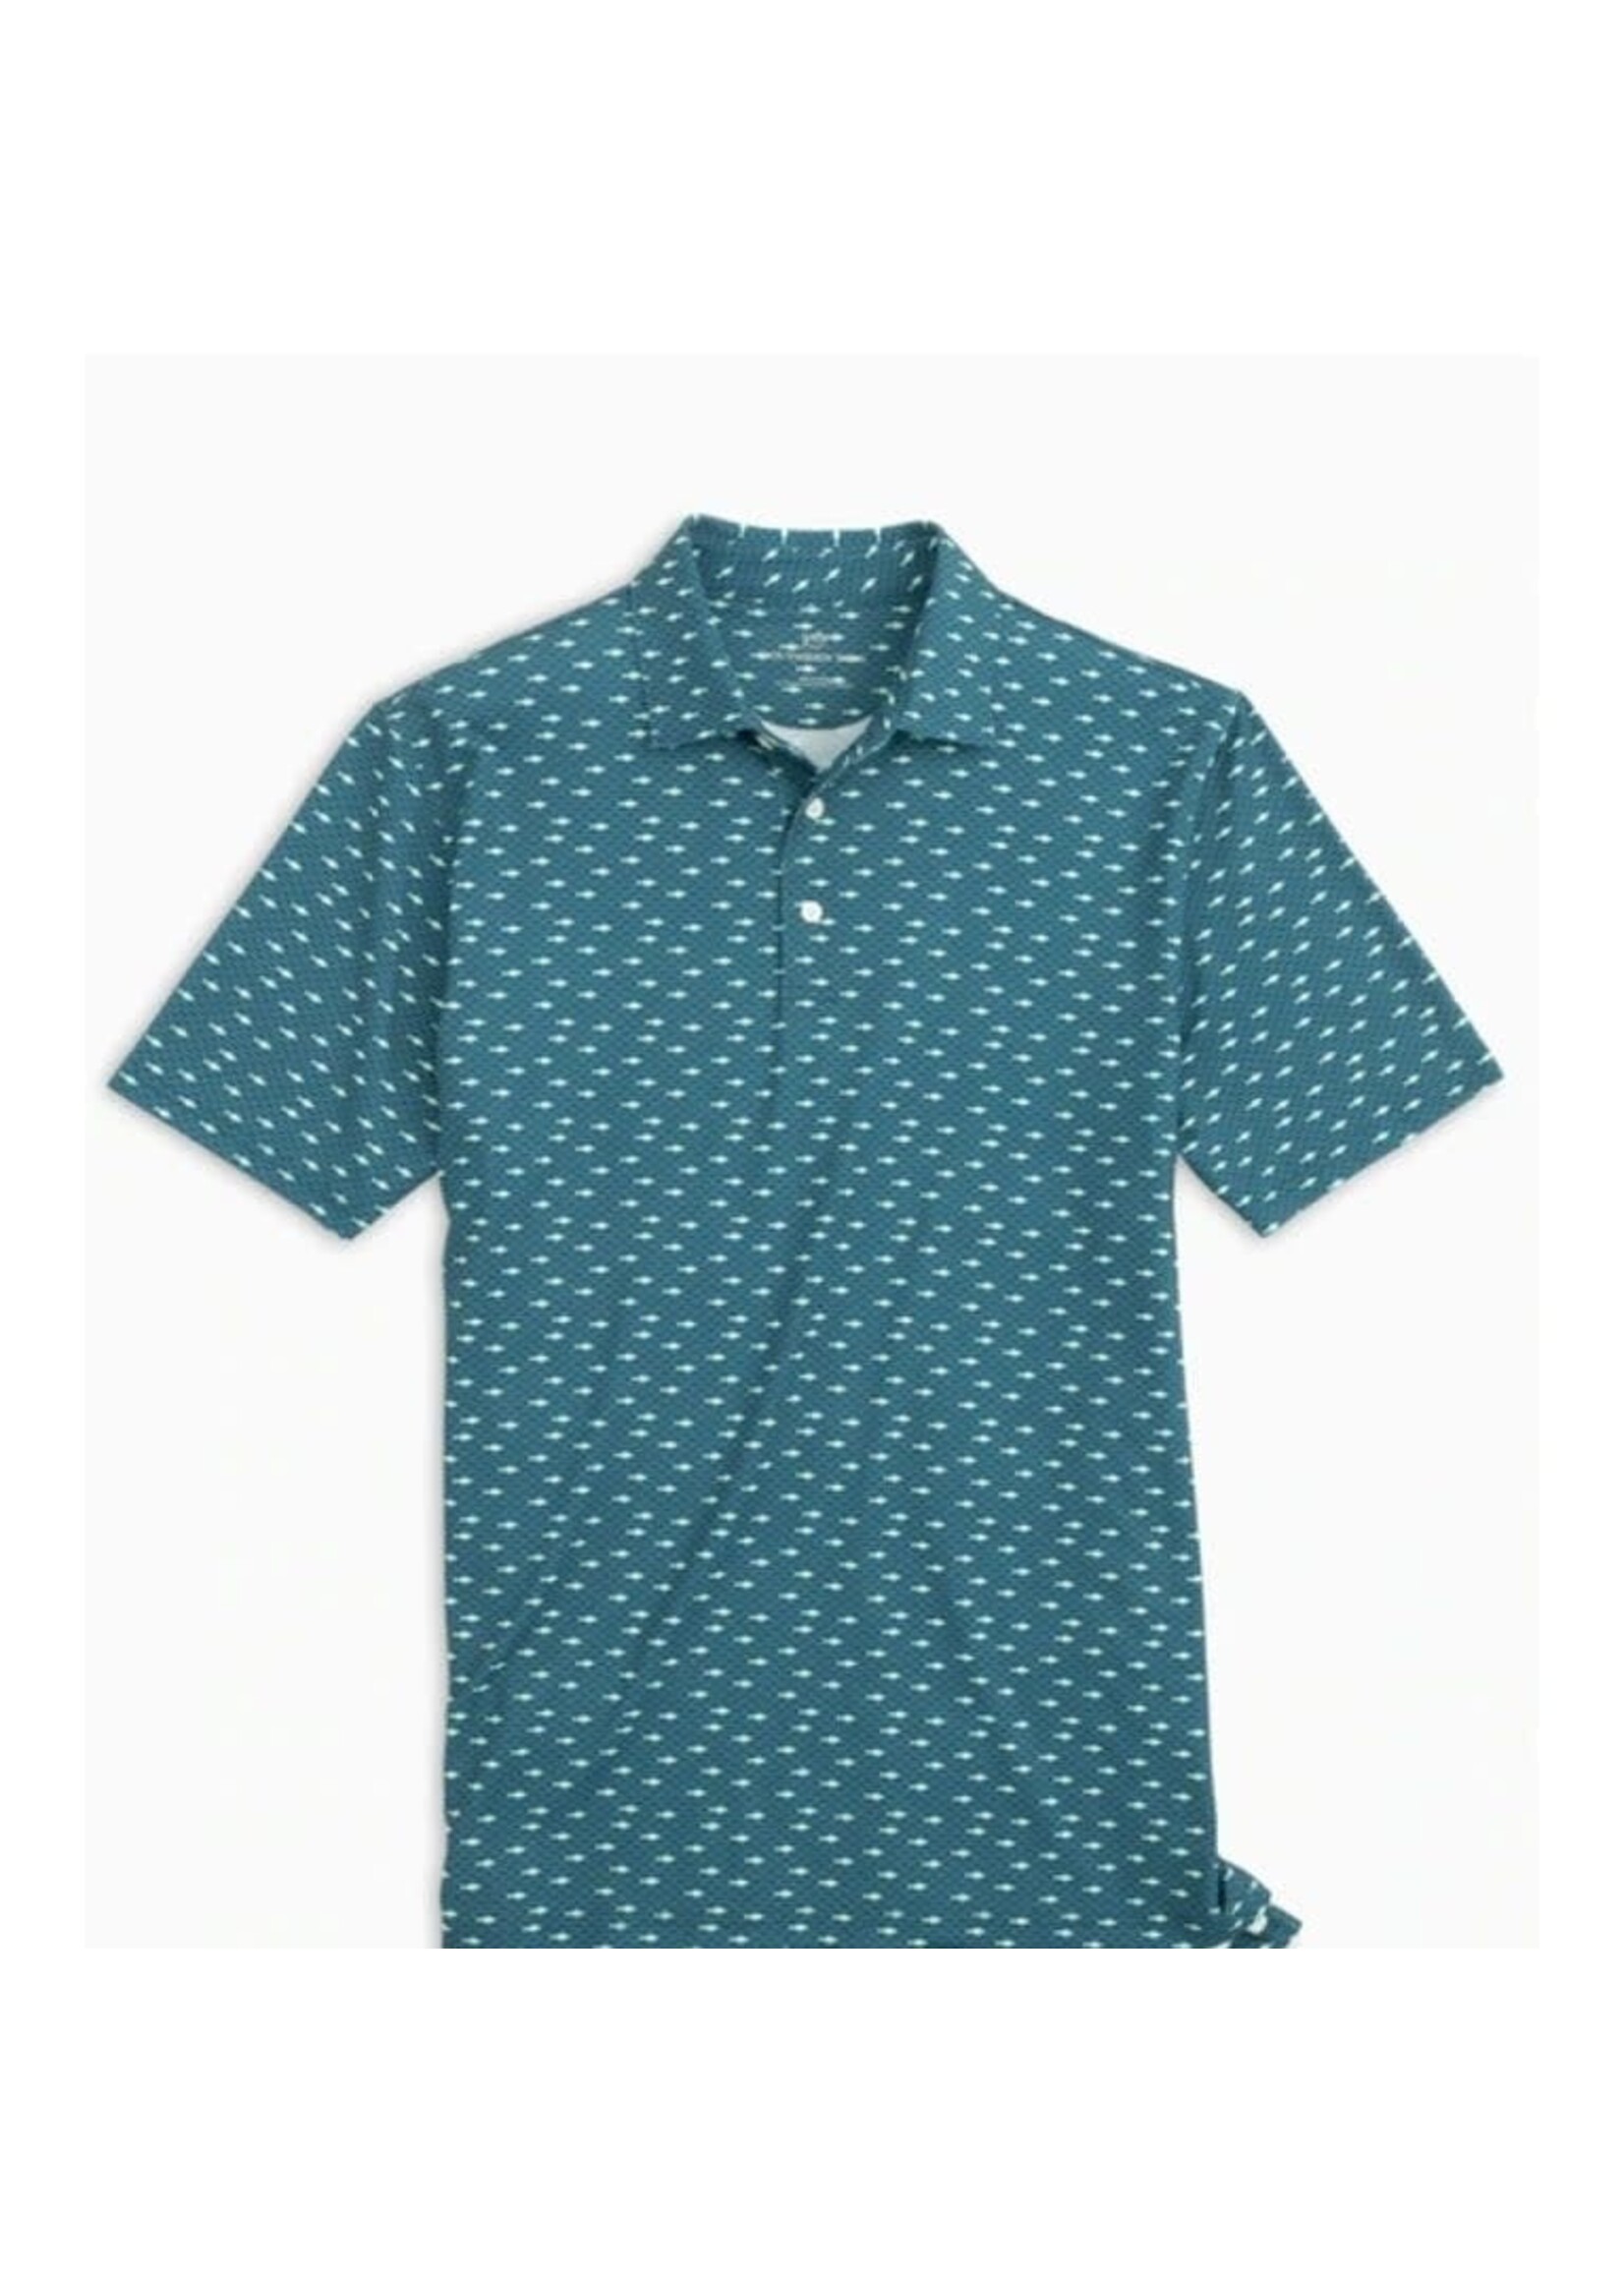 Southern Tide Driver cann printed performance polo